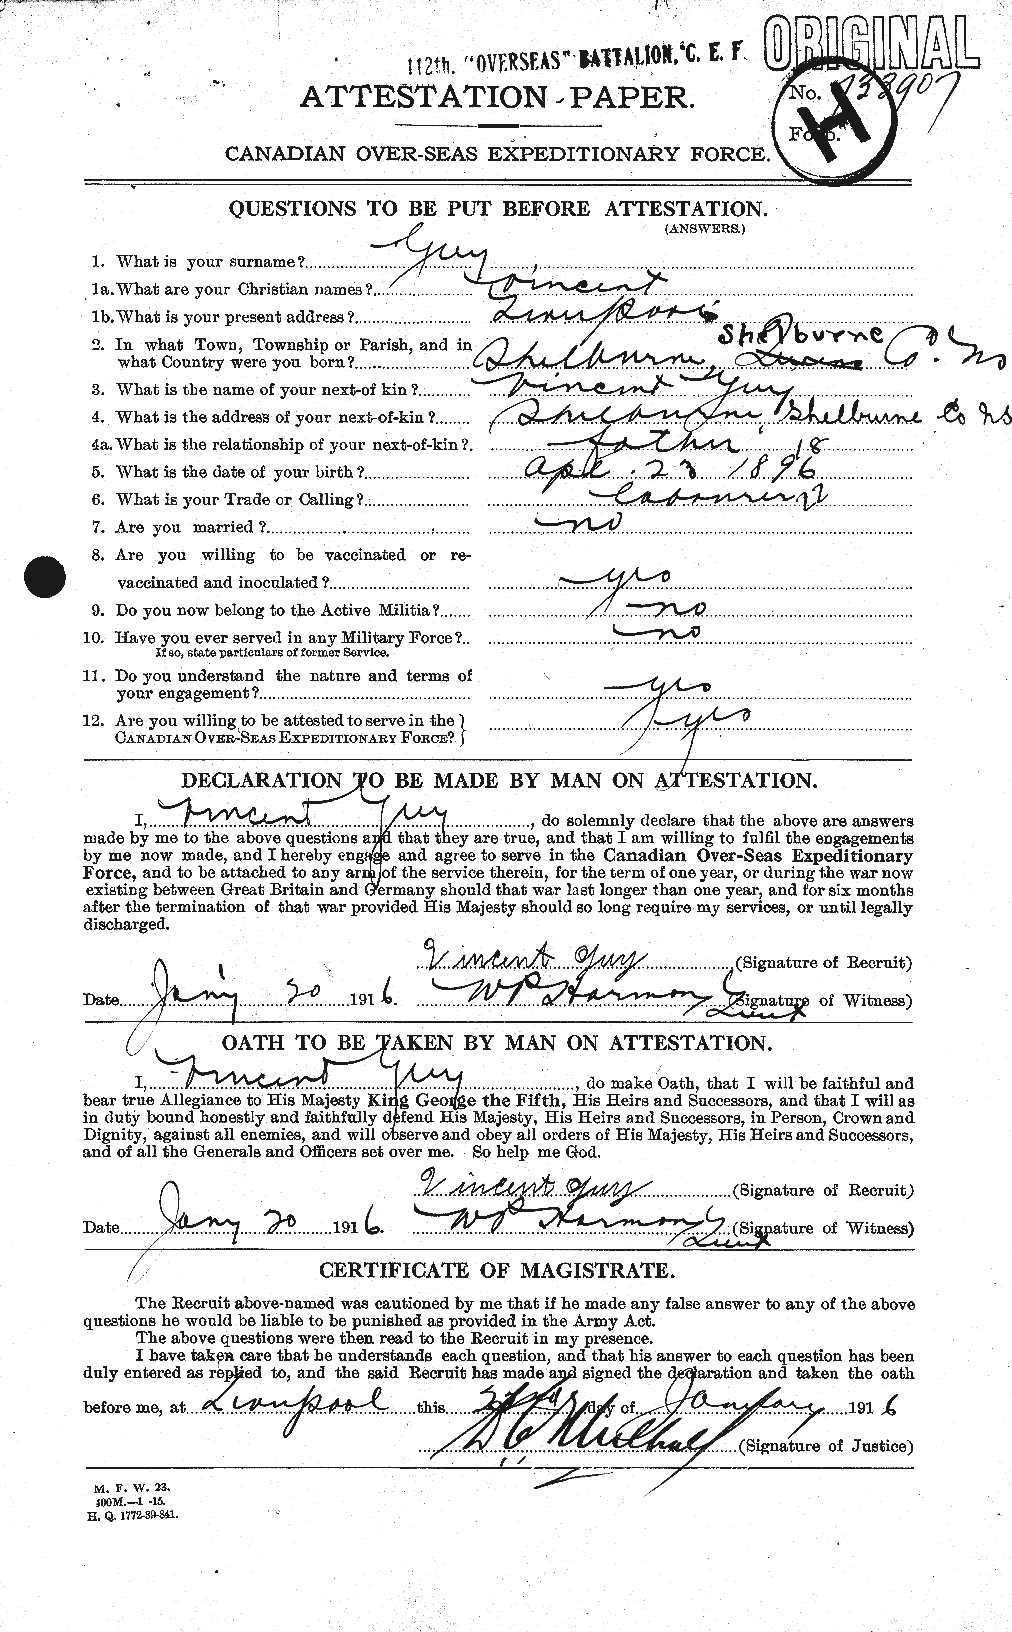 Personnel Records of the First World War - CEF 367294a